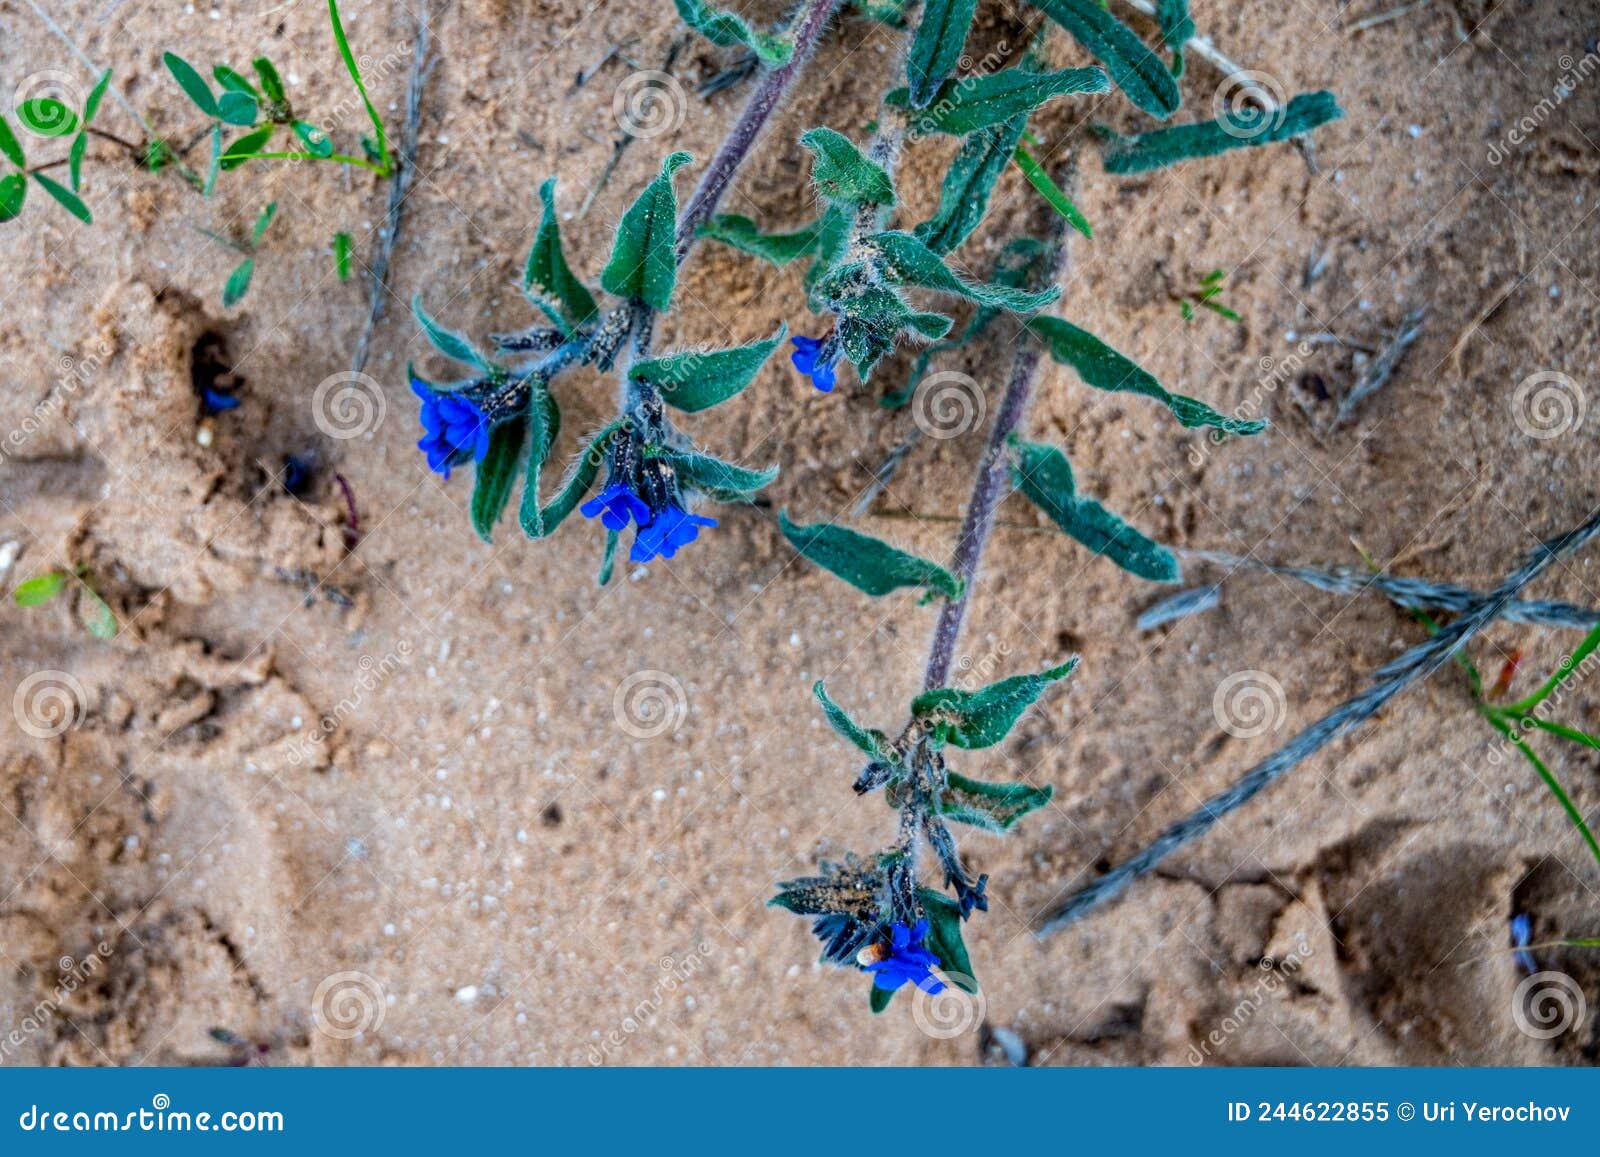 a low shrub of blue small flowers on long emerald stems is called trichodesma zeylanicum.